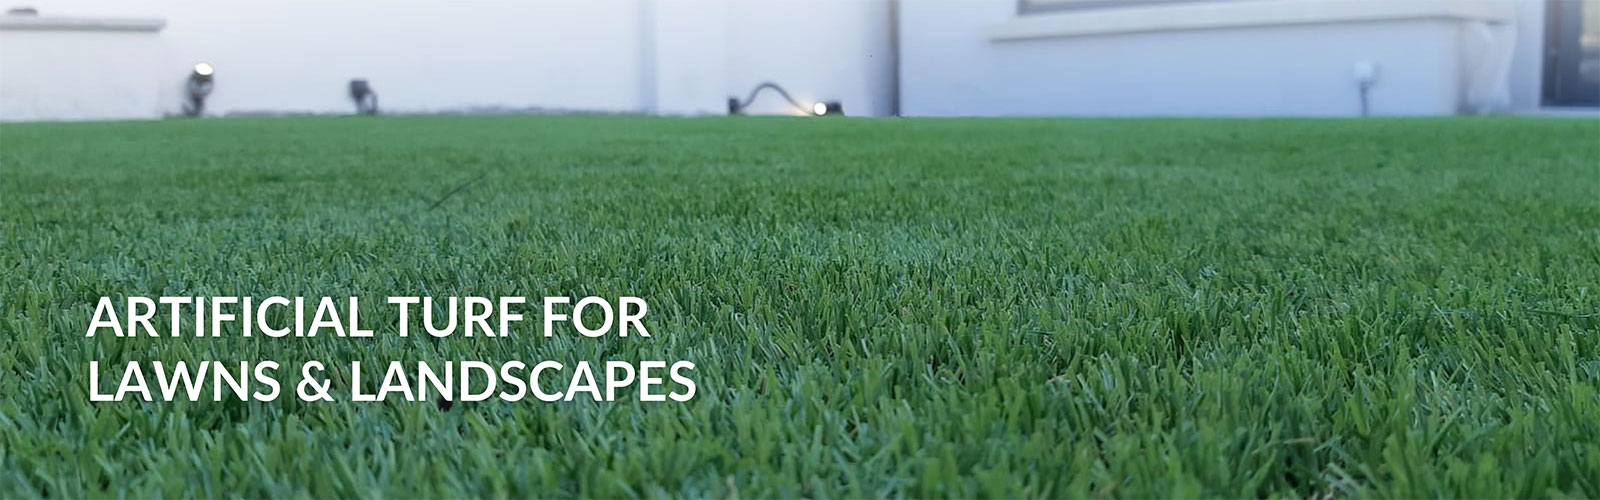 Artificial turf for lawns and landscapes